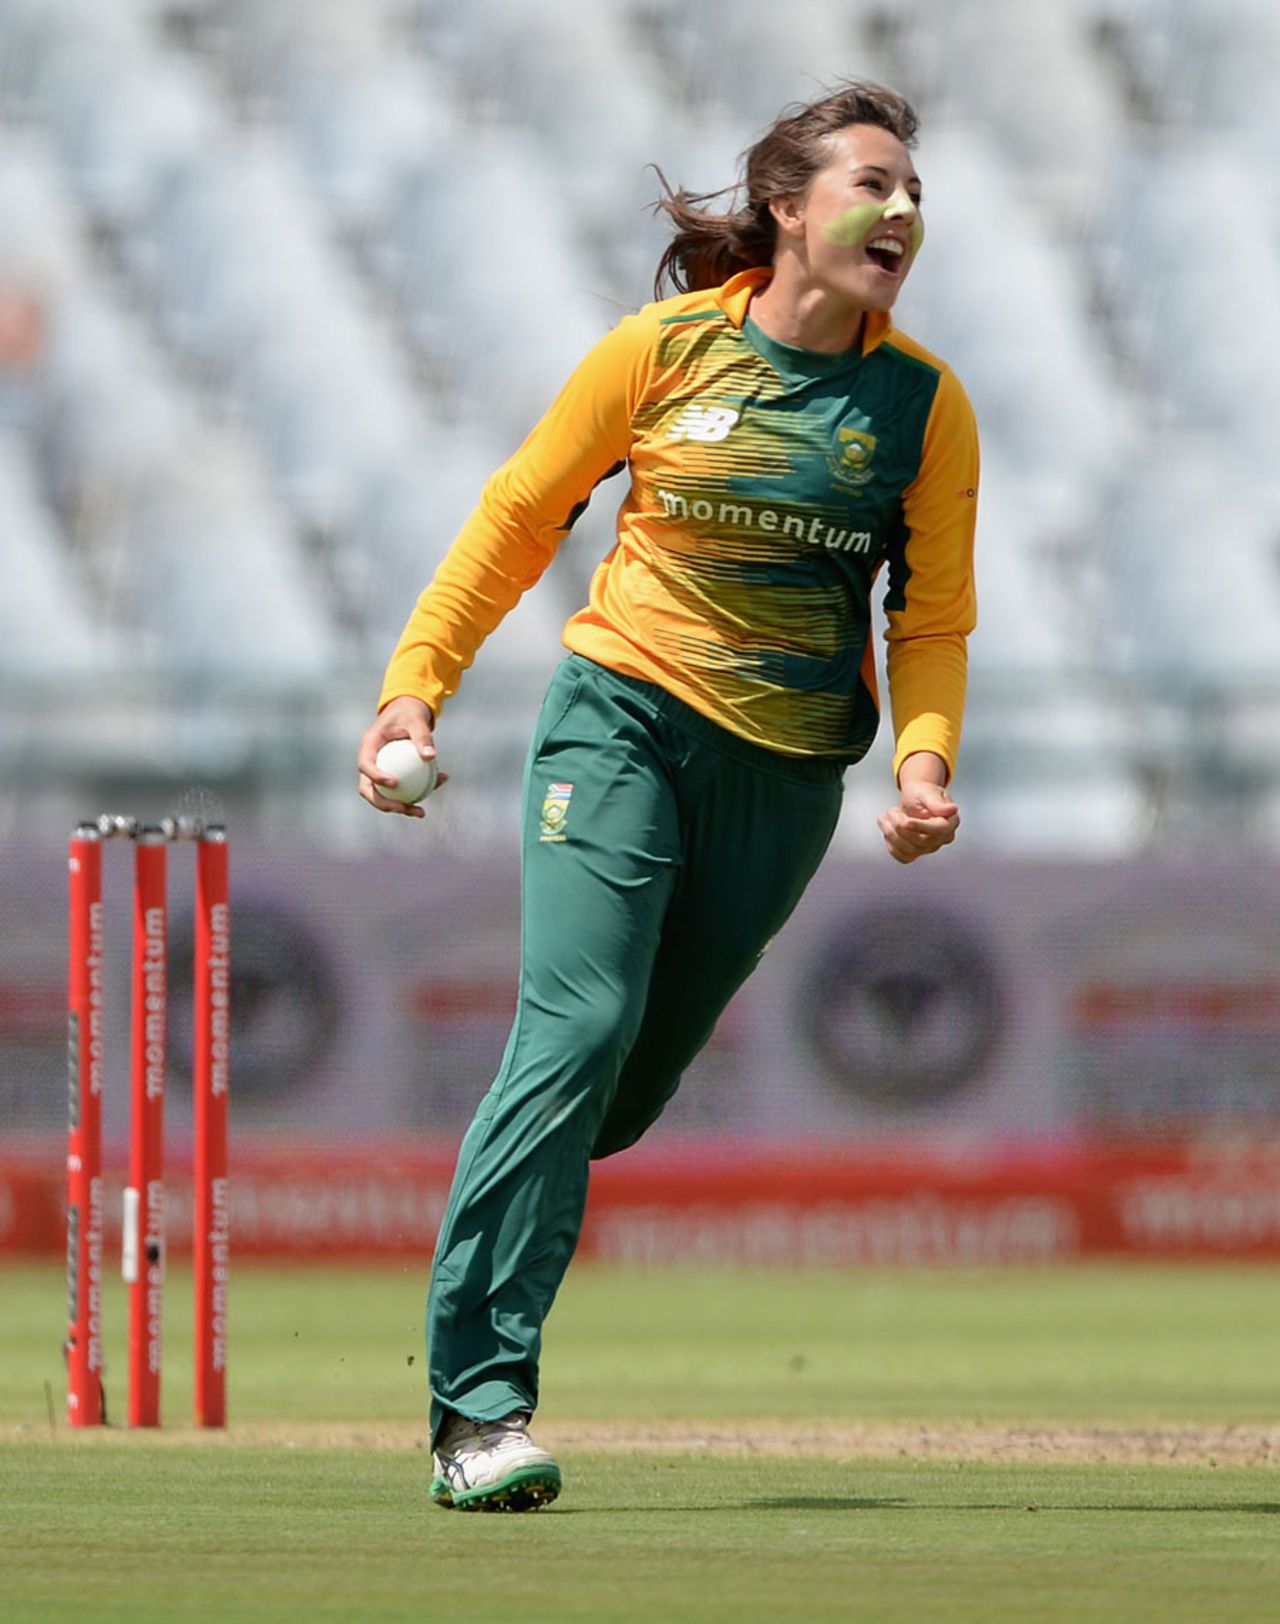 Sune Luus took two wickets with her legspin, South Africa Women v England Women, 2nd T20, Cape Town, February 19, 2016